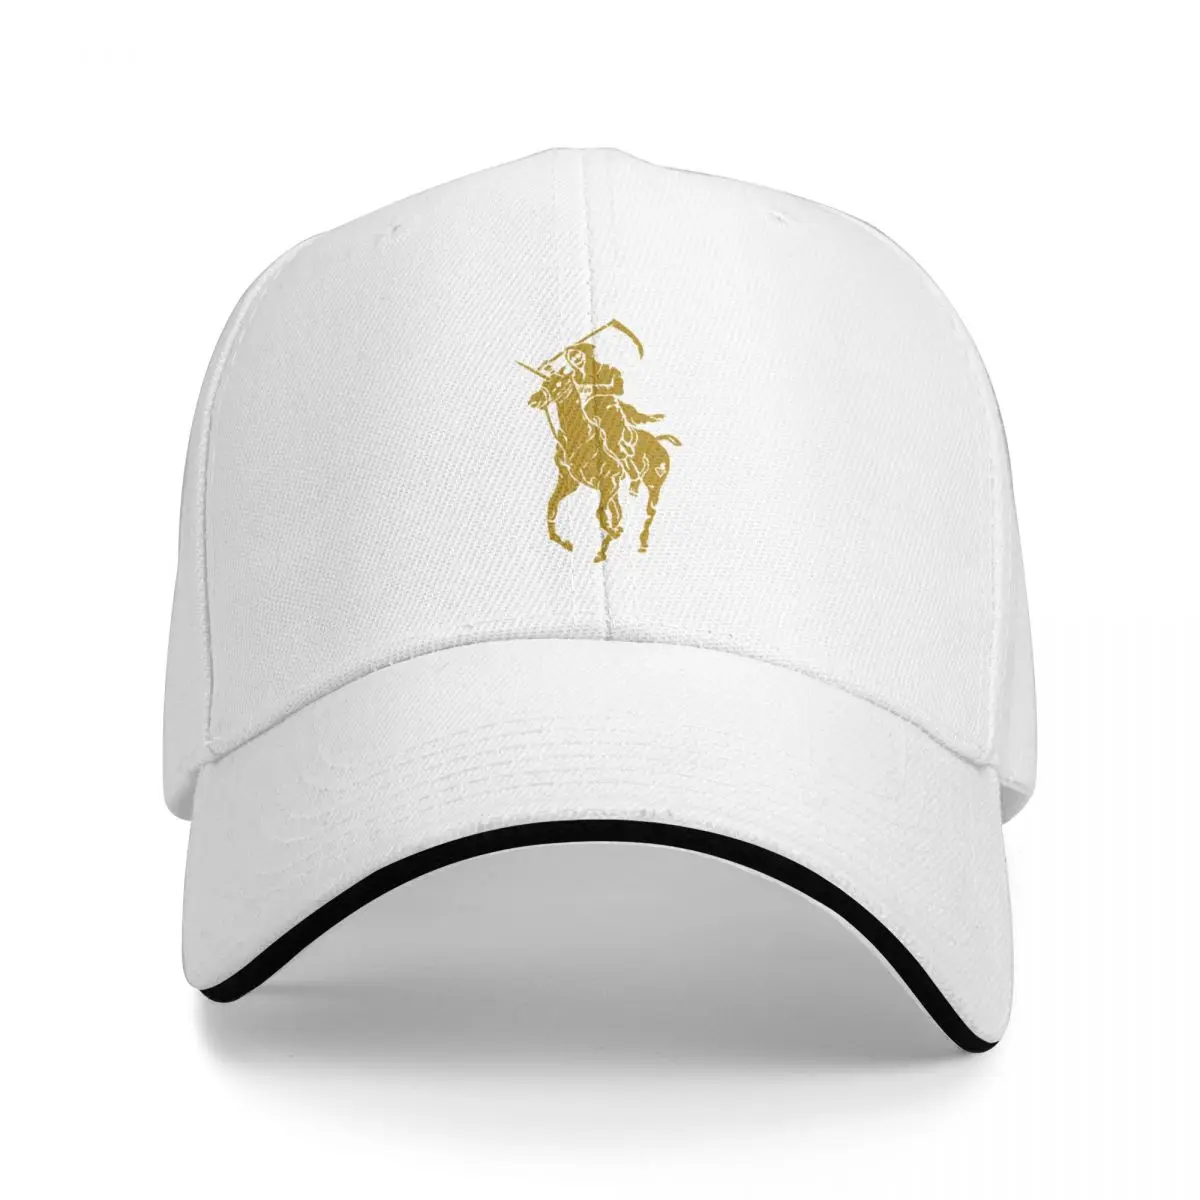 Polo hats for men: Top Off Your Look缩略图